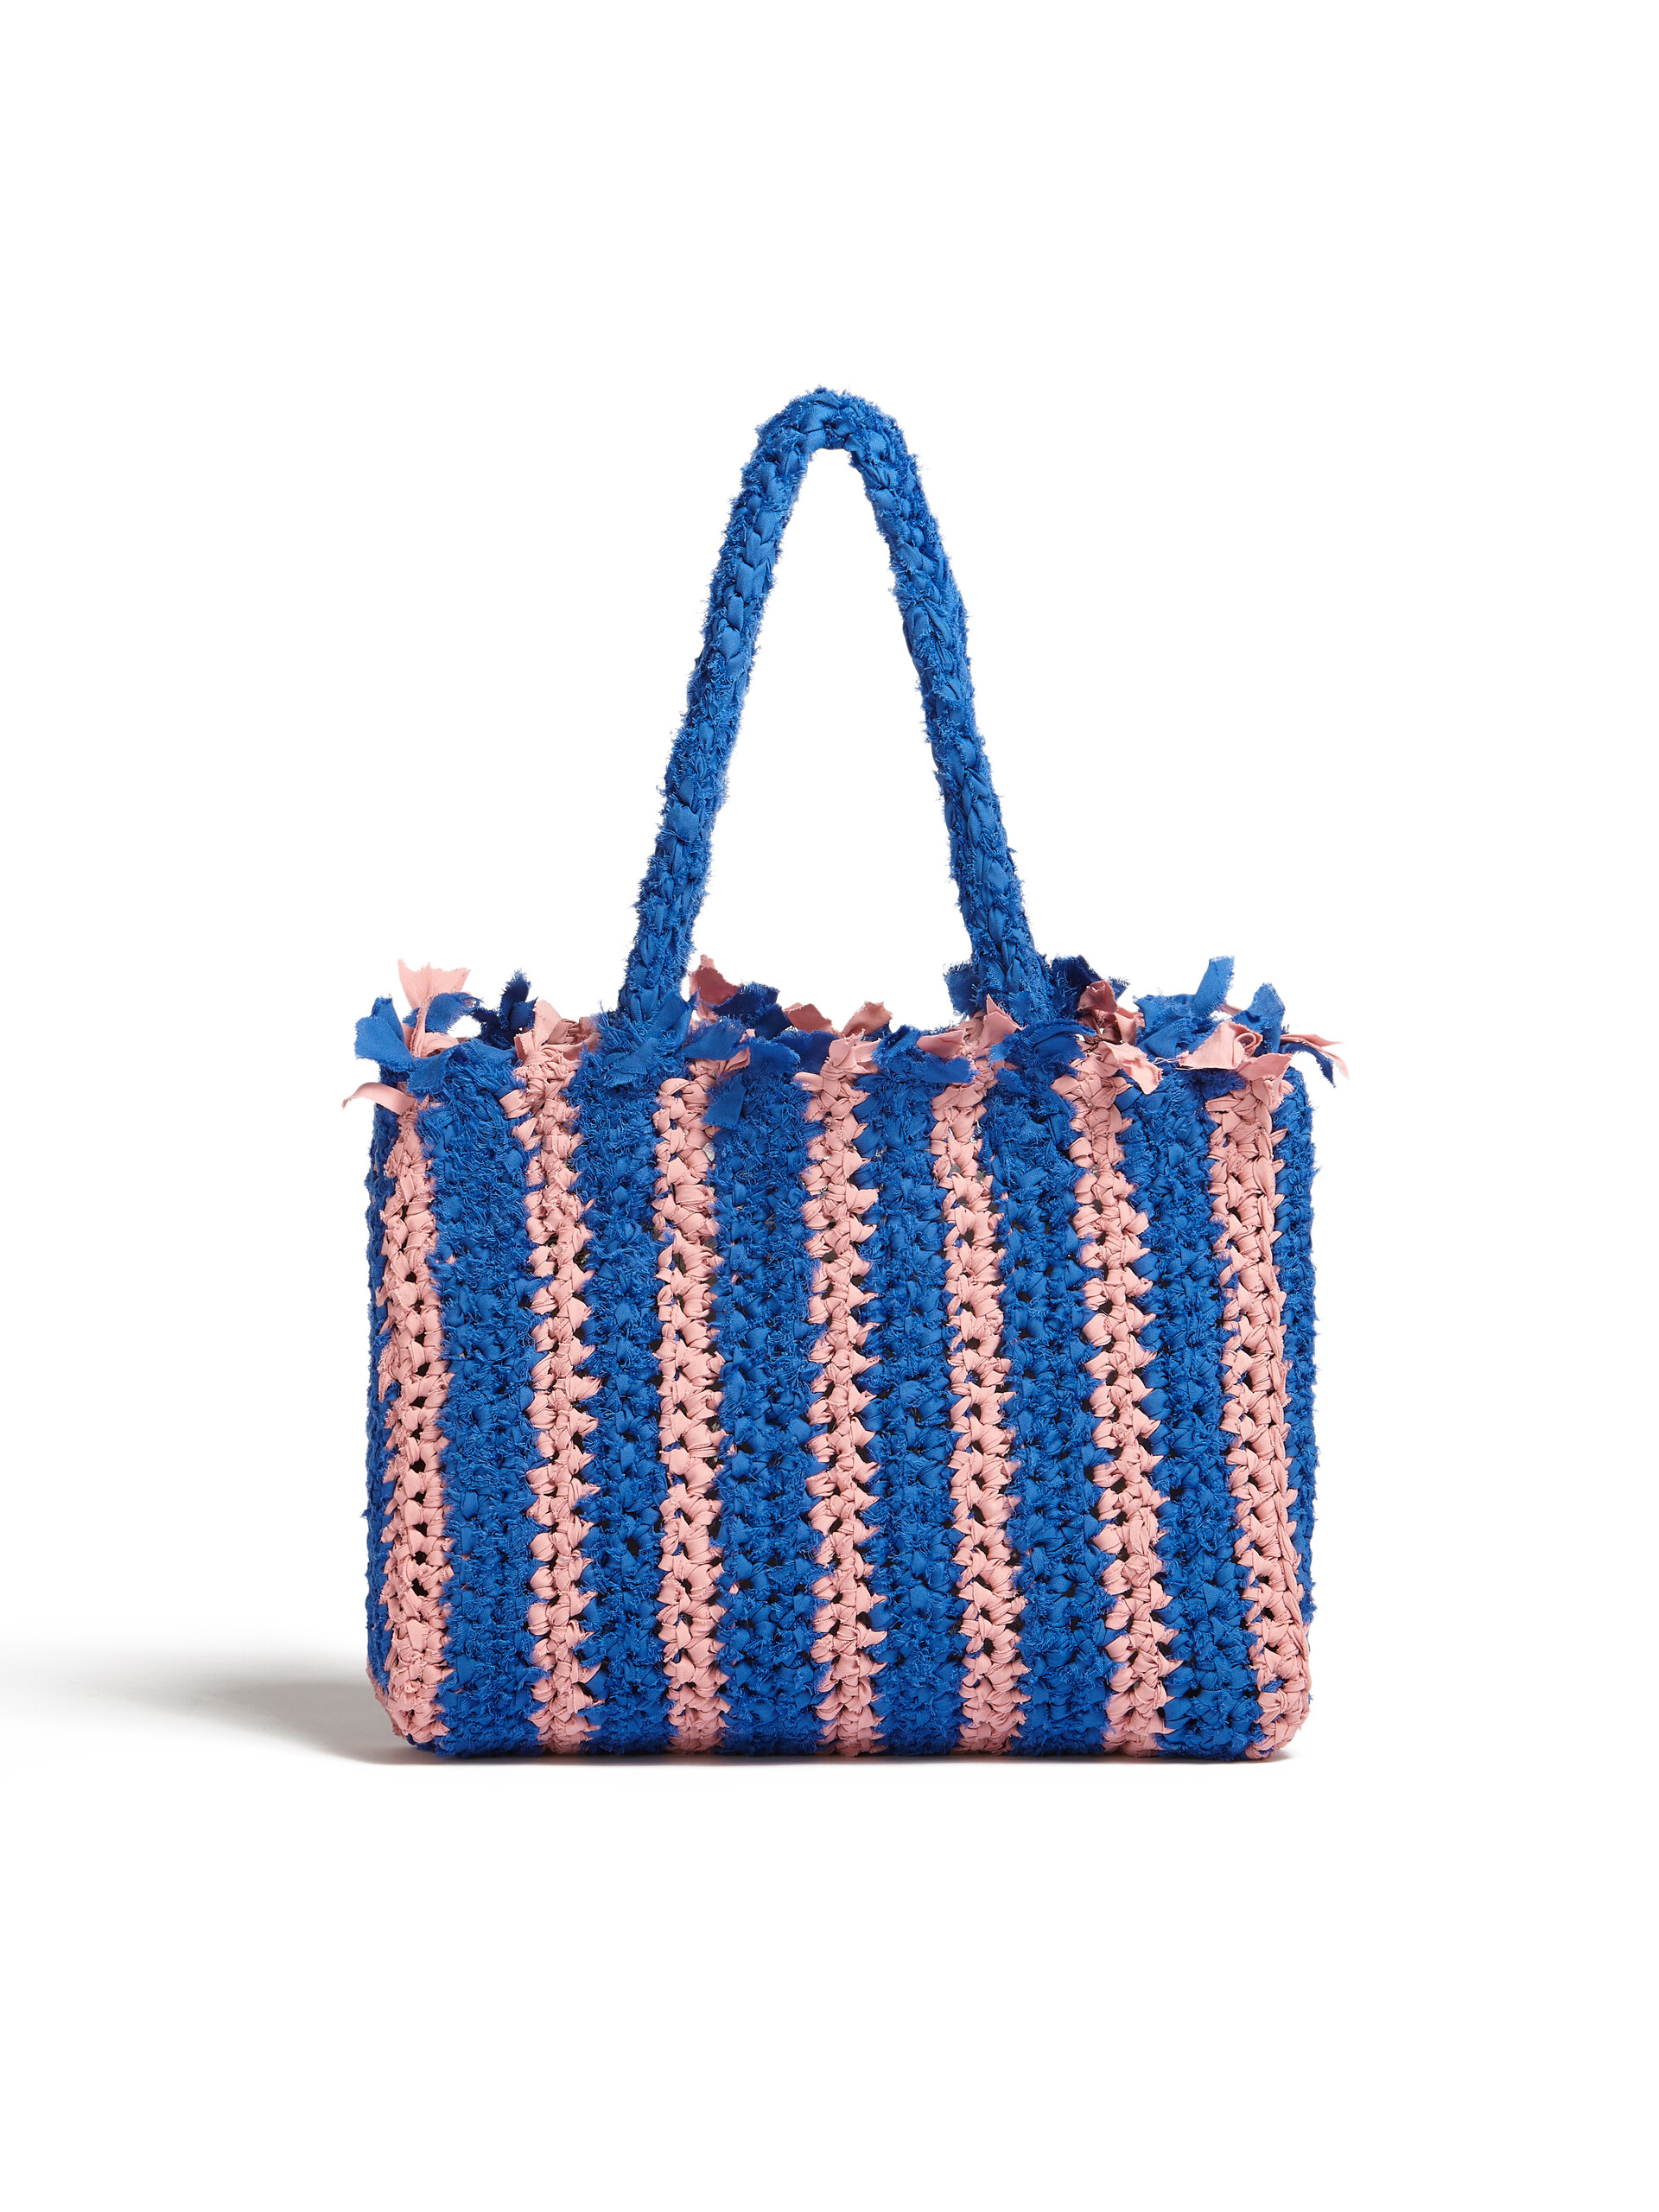 MARNI MARKET bag in pink and blue cotton - Bags - Image 3